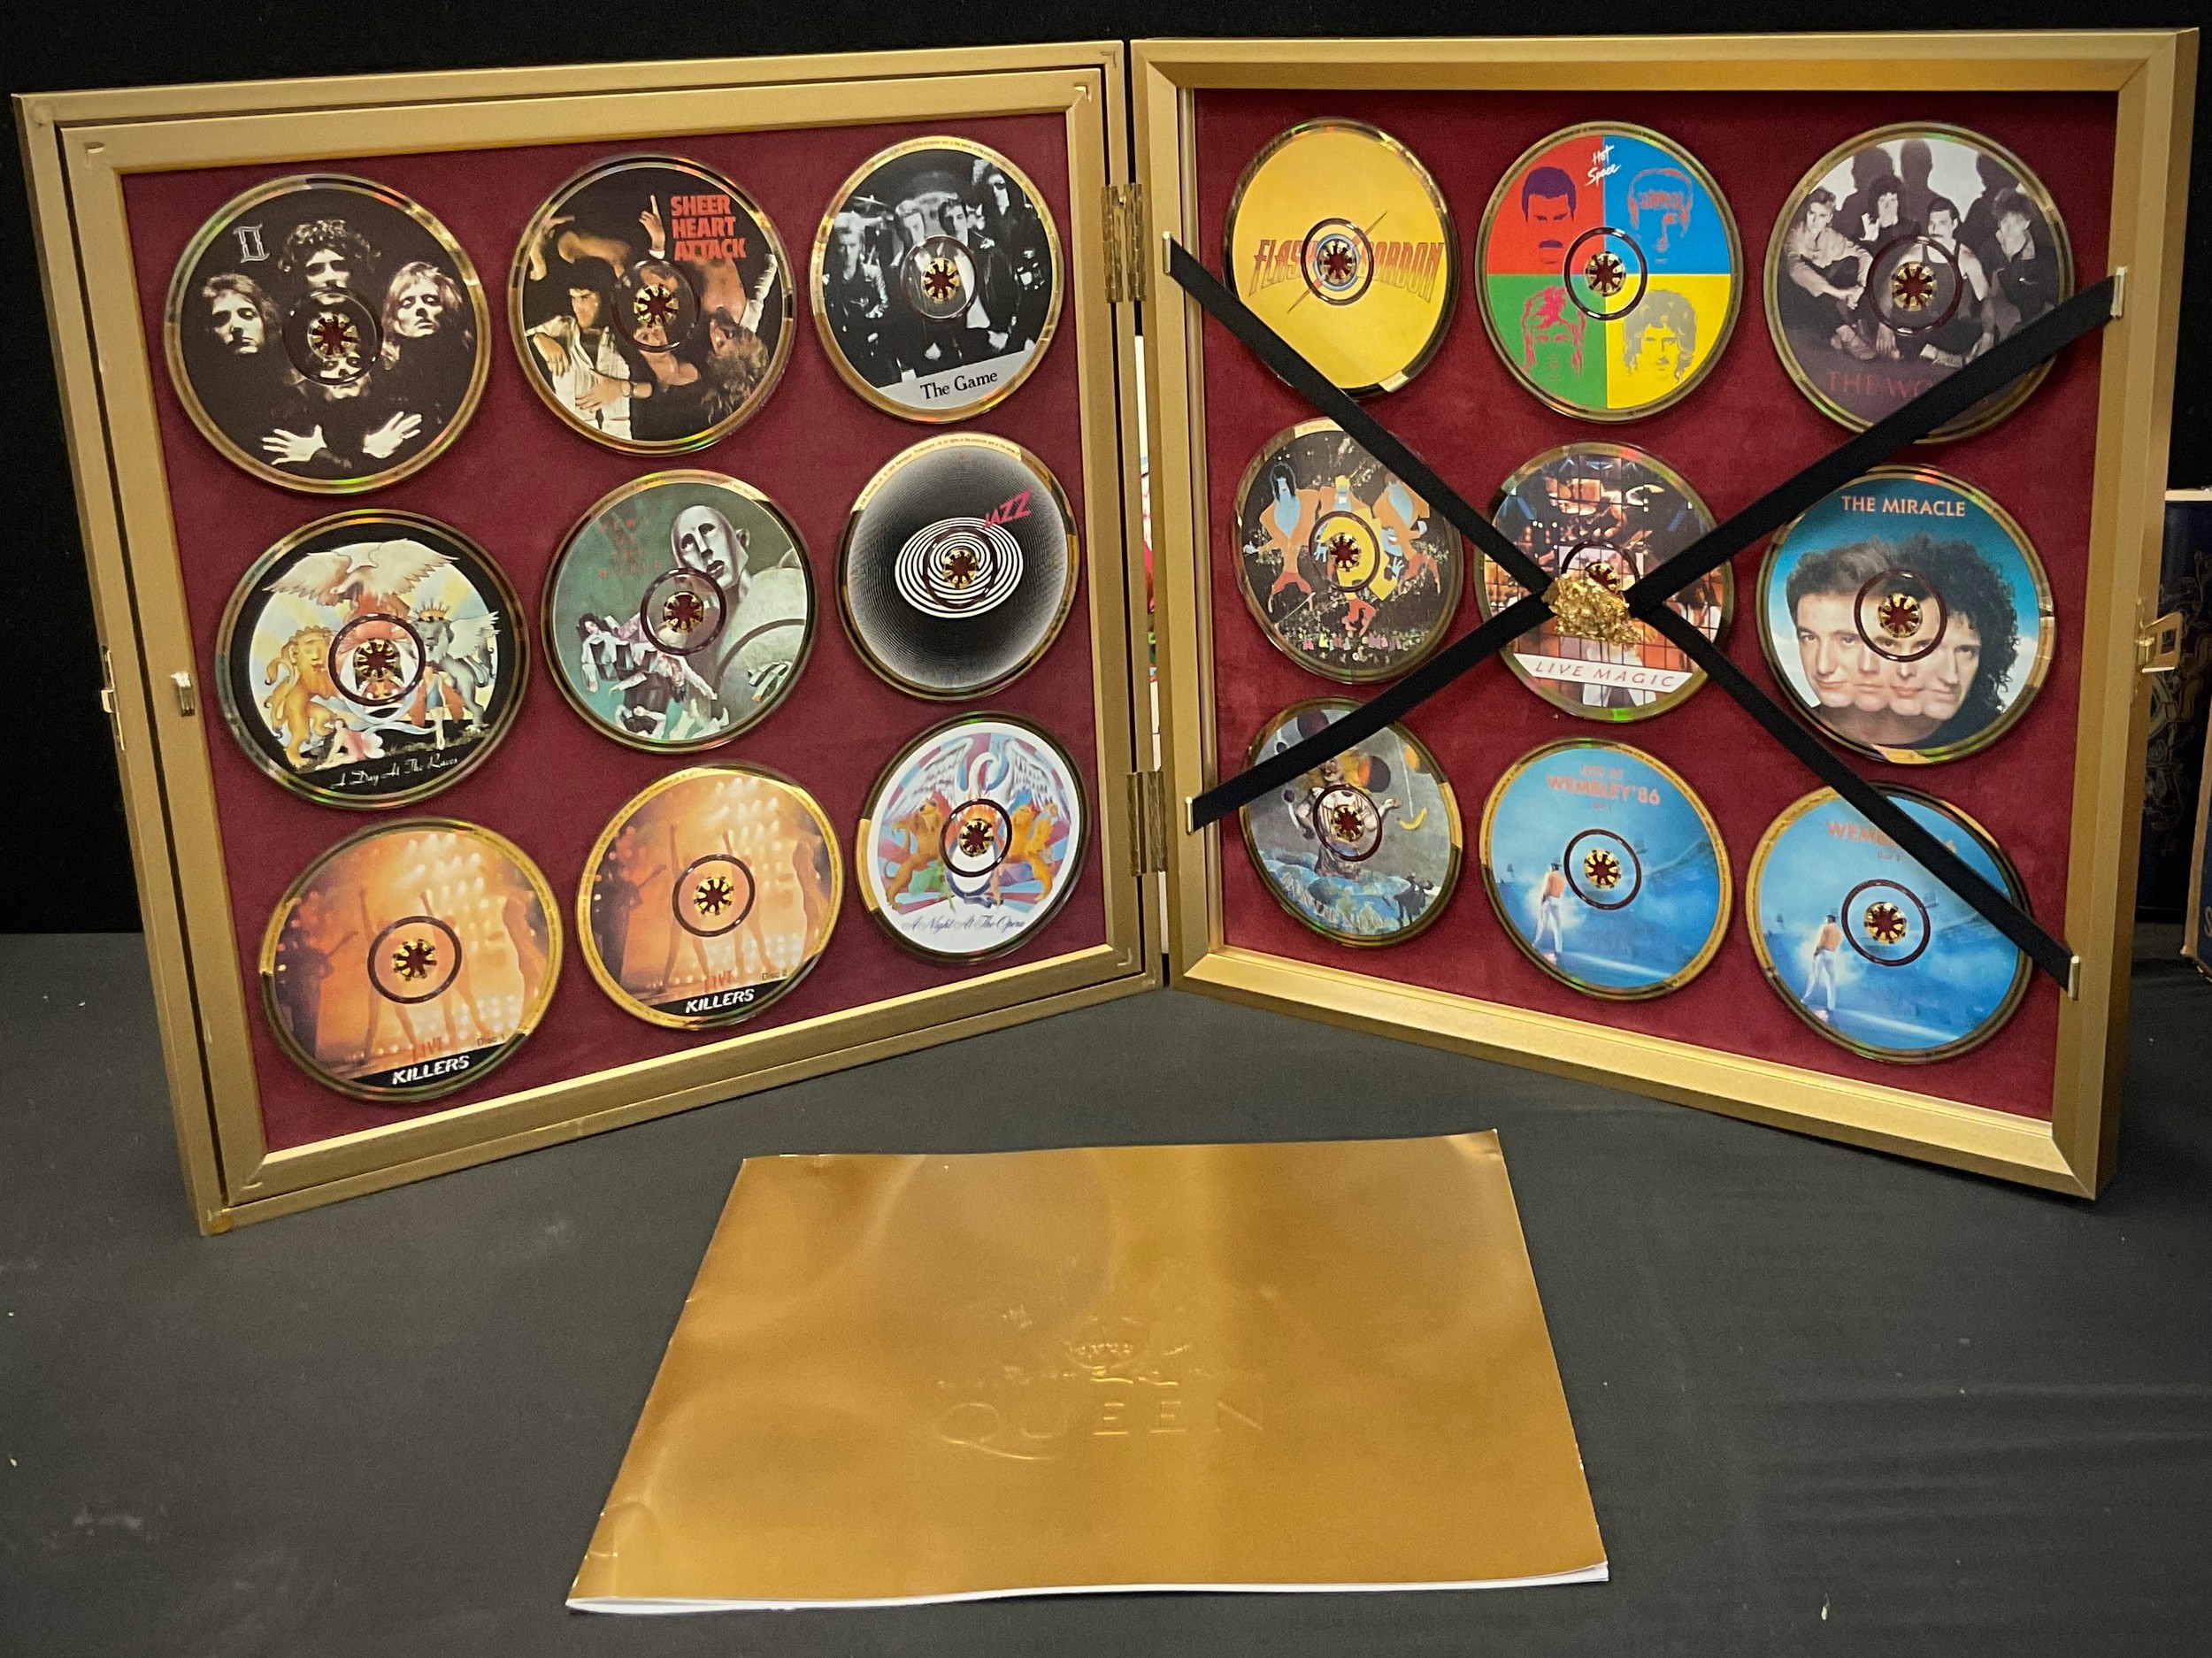 Queen limited edition - the ultimate collection box set wall display case. No 3423 of 5000.